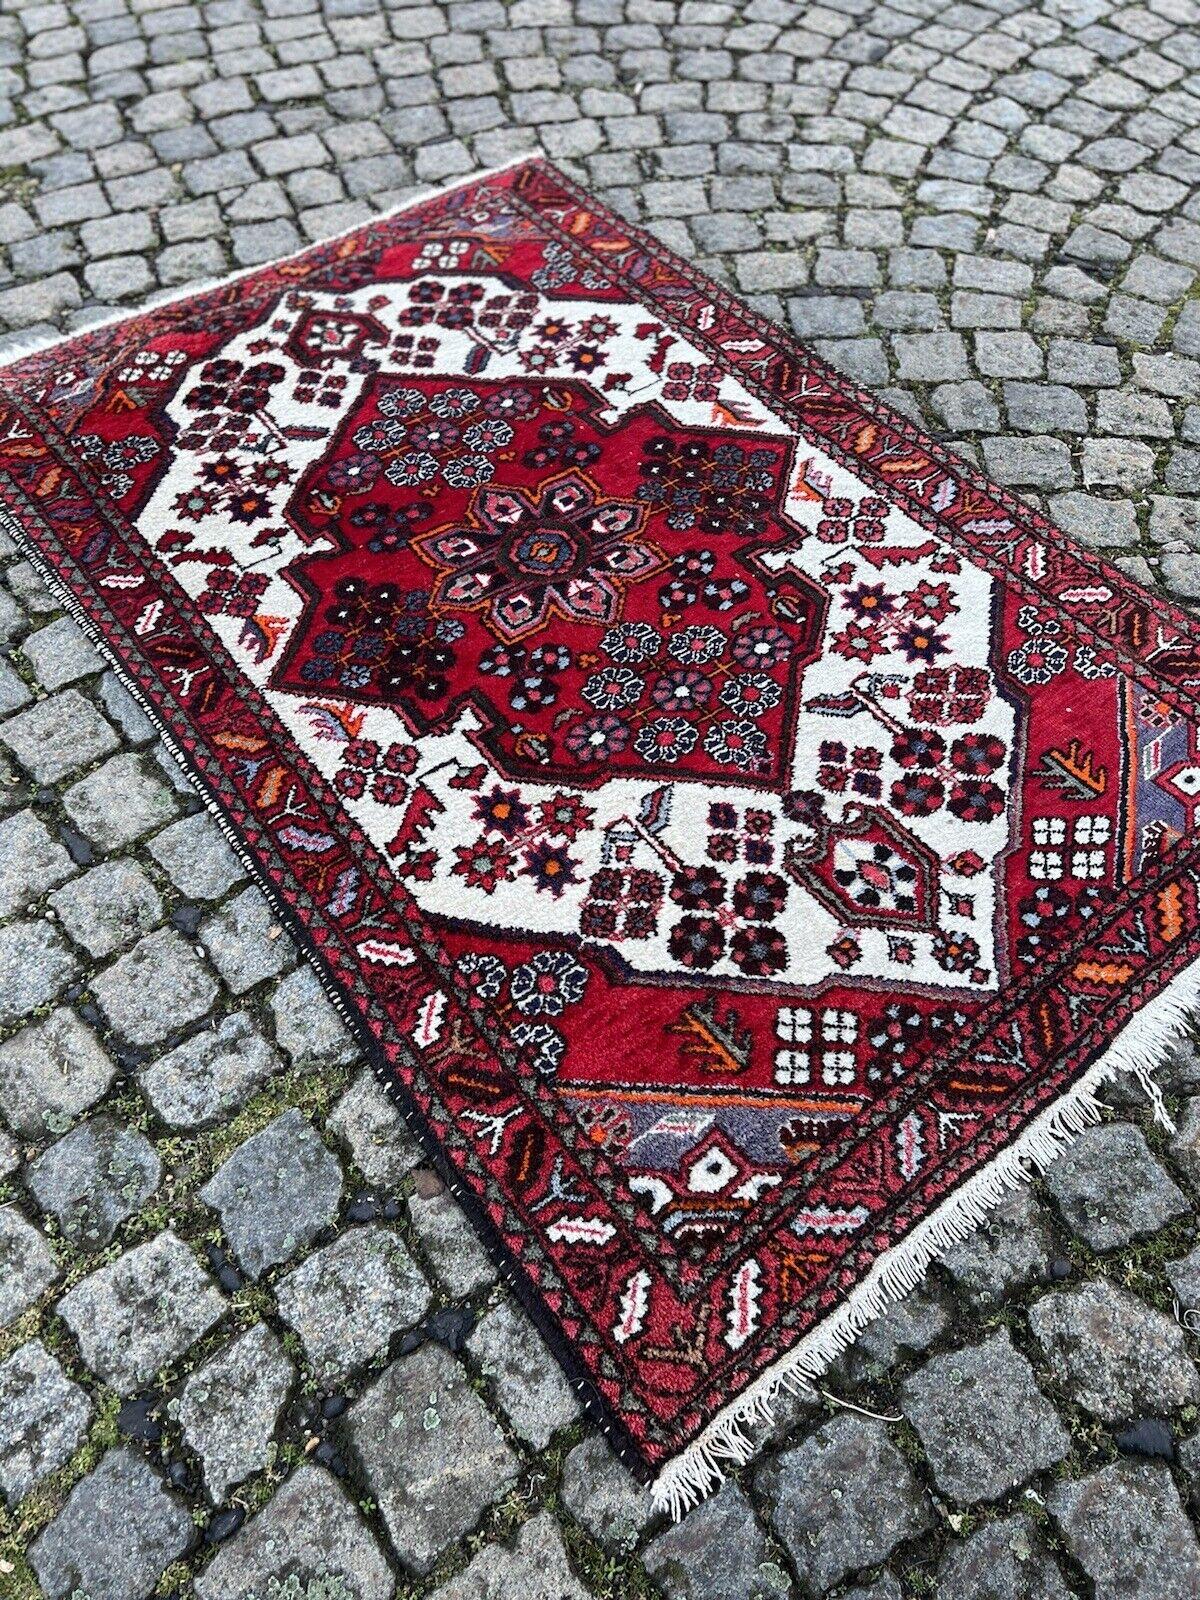 Handmade Vintage Persian Style Hamadan Rug

Add a touch of timeless elegance and classic artistry to your home with this handmade vintage Persian style Hamadan rug. Crafted in the 1970s from quality wool, this rug features intricate geometric and